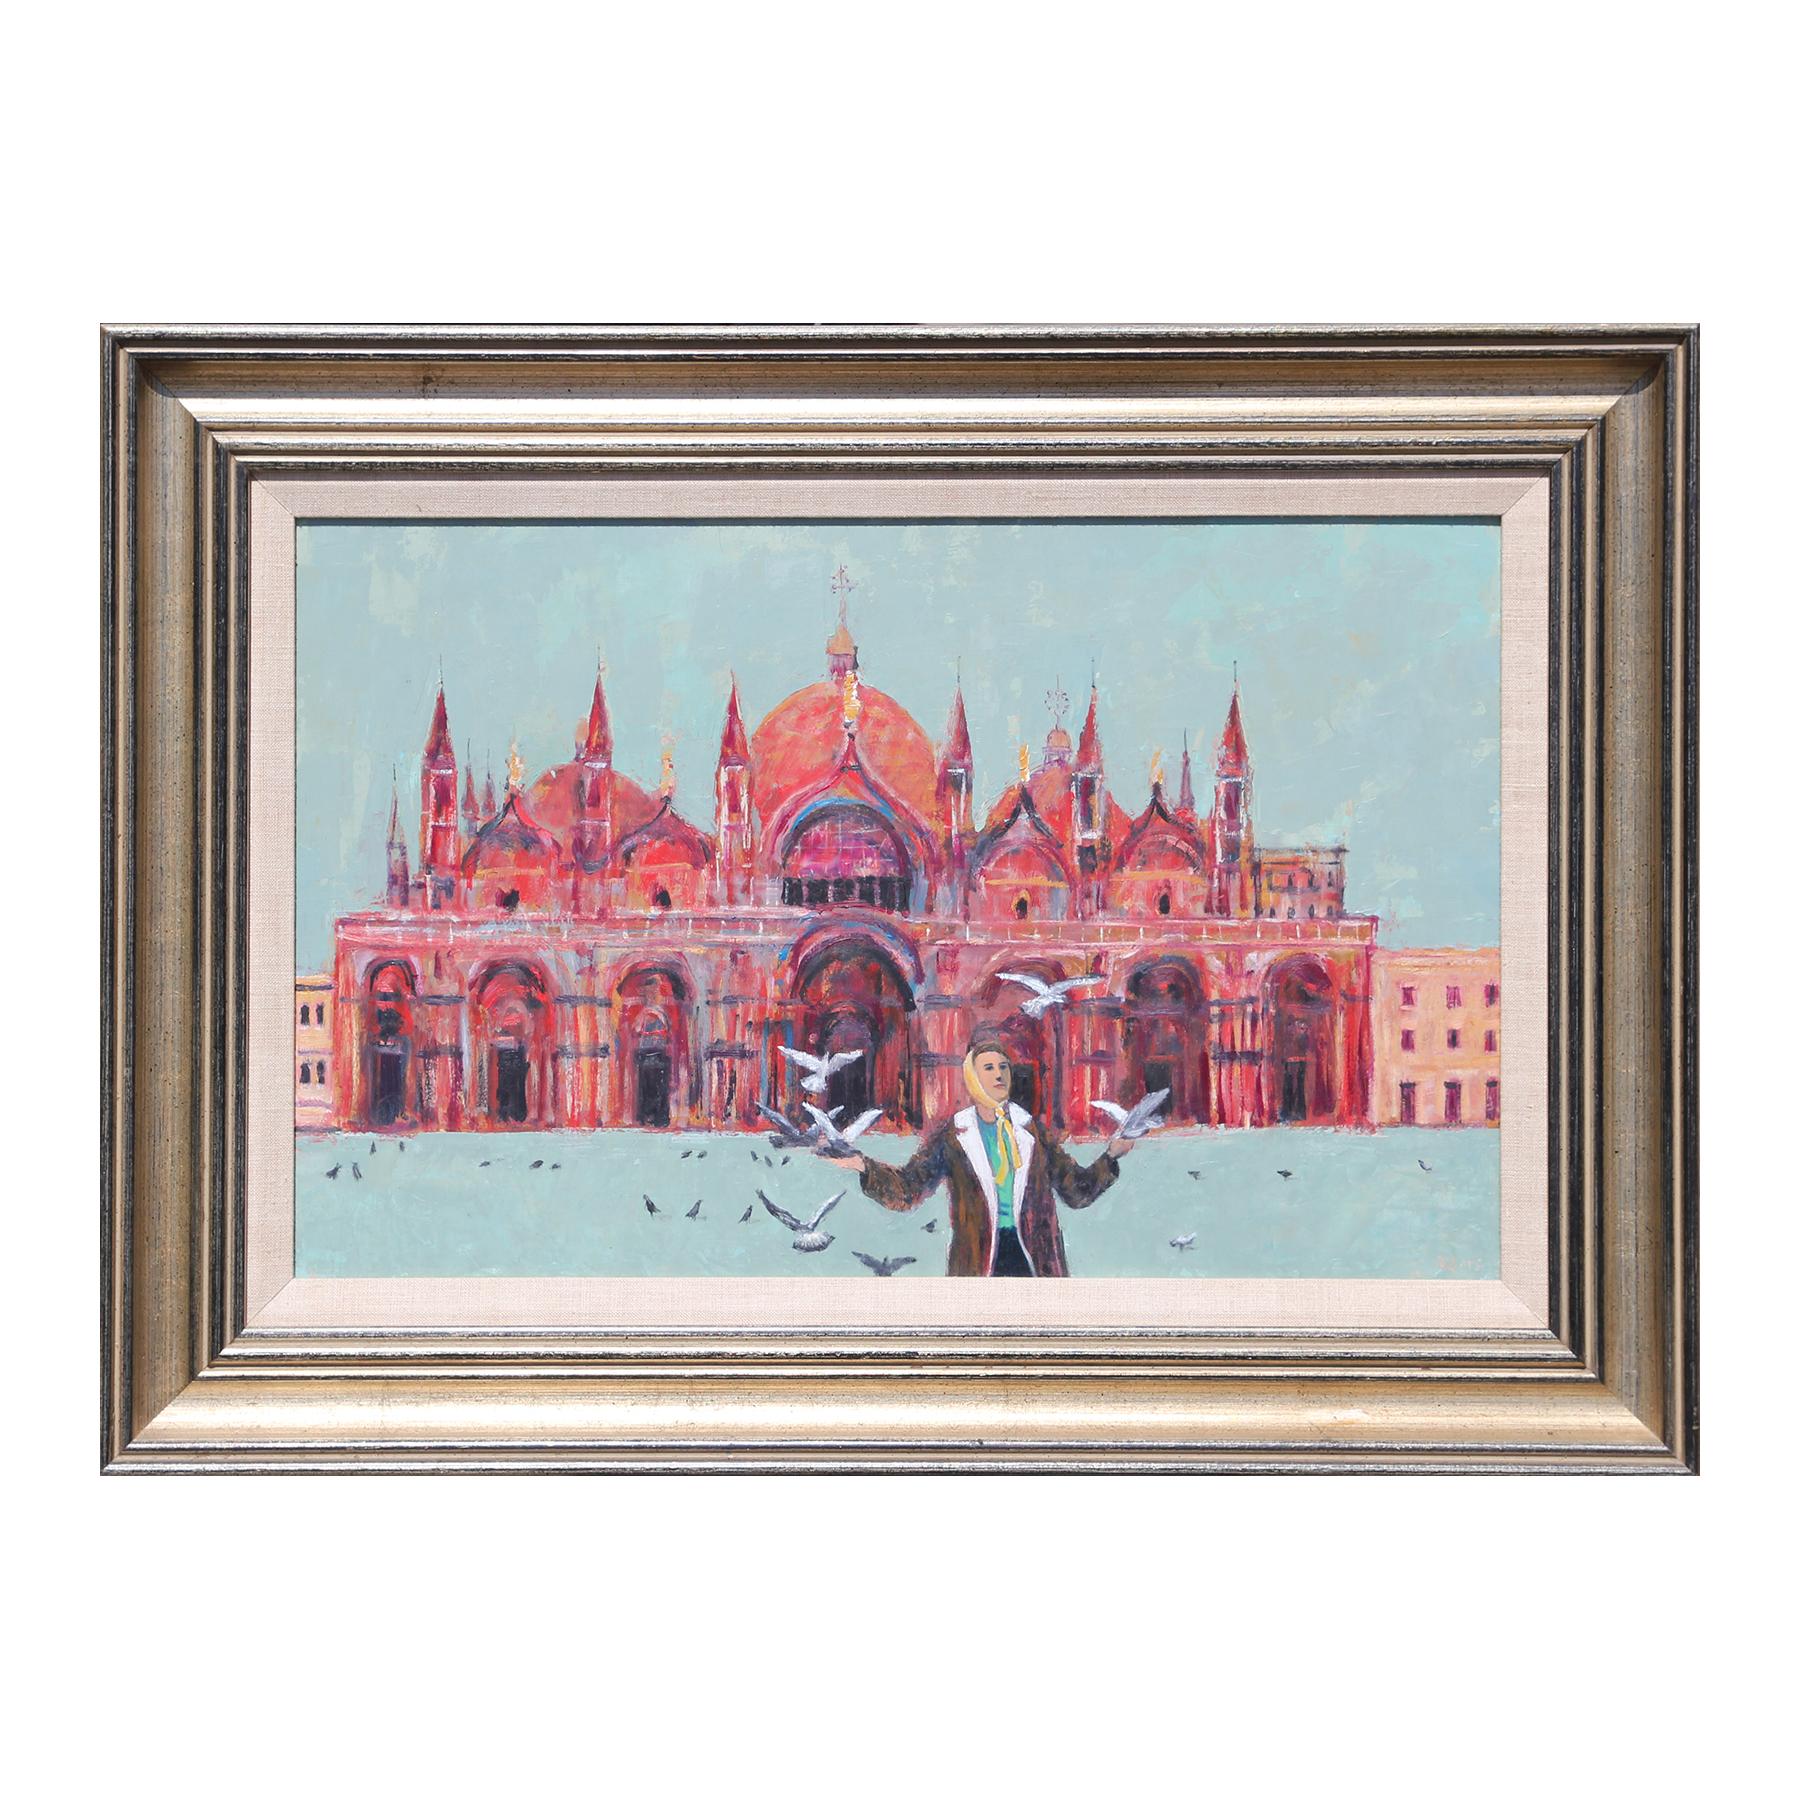 Abstract painting of "Woman with Birds at St. Marks Square" Basilica in Venice by Texas artist, Herbert Mears. The painting incorporates red/coral and light blue tones. Signed by the artist in the bottom right corner and is displayed in an antique